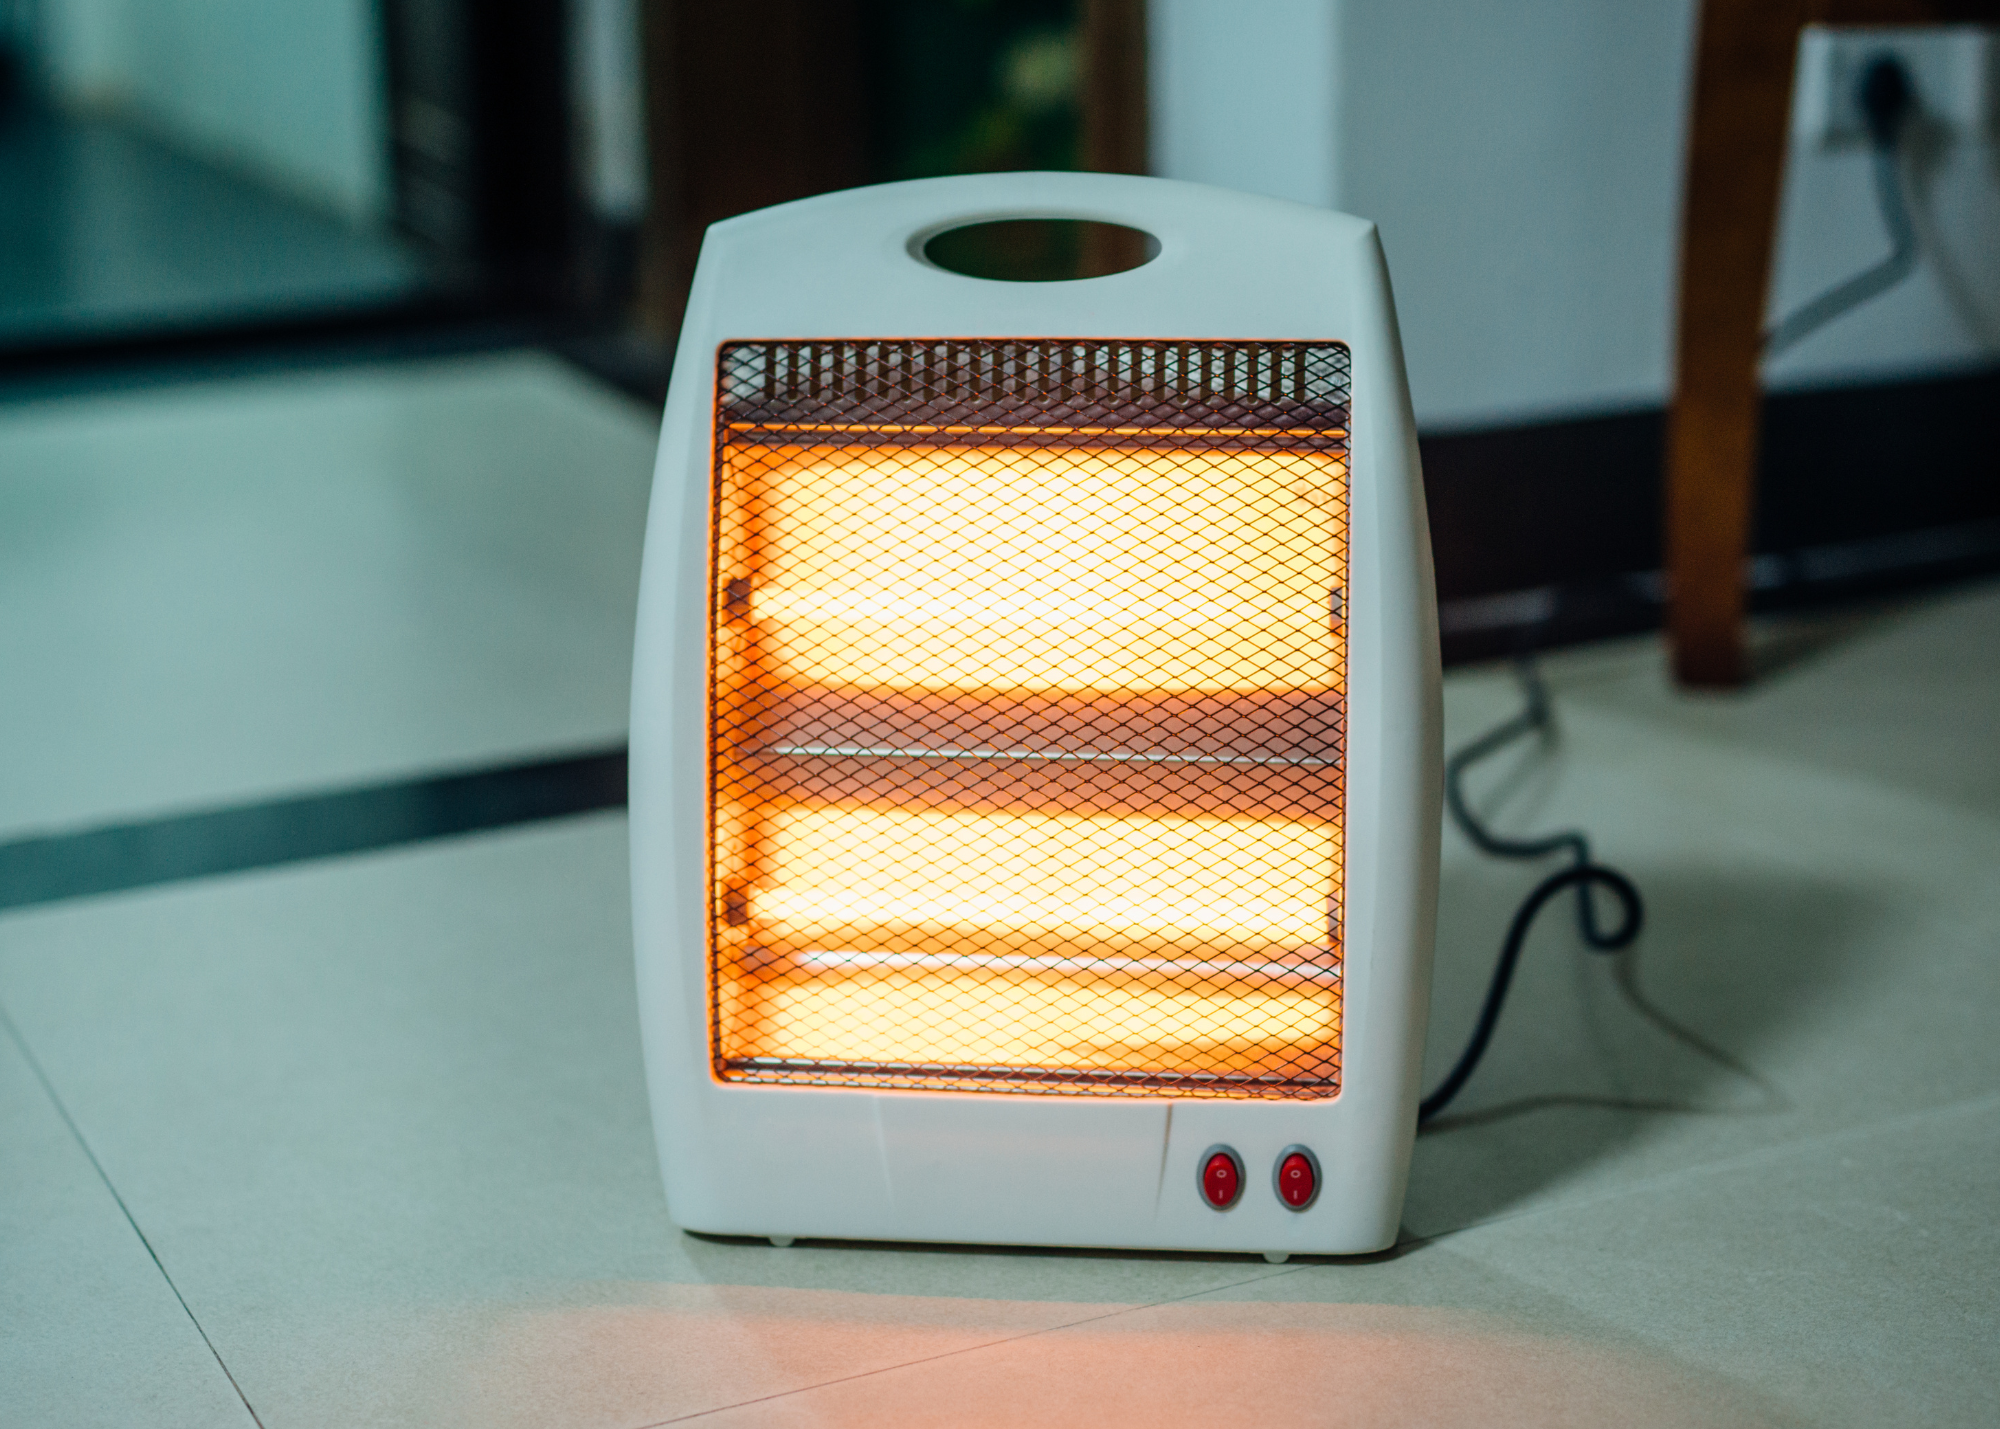 Tamarac Fire Department: Stay Warm, But Be Careful Using Space Heaters 1